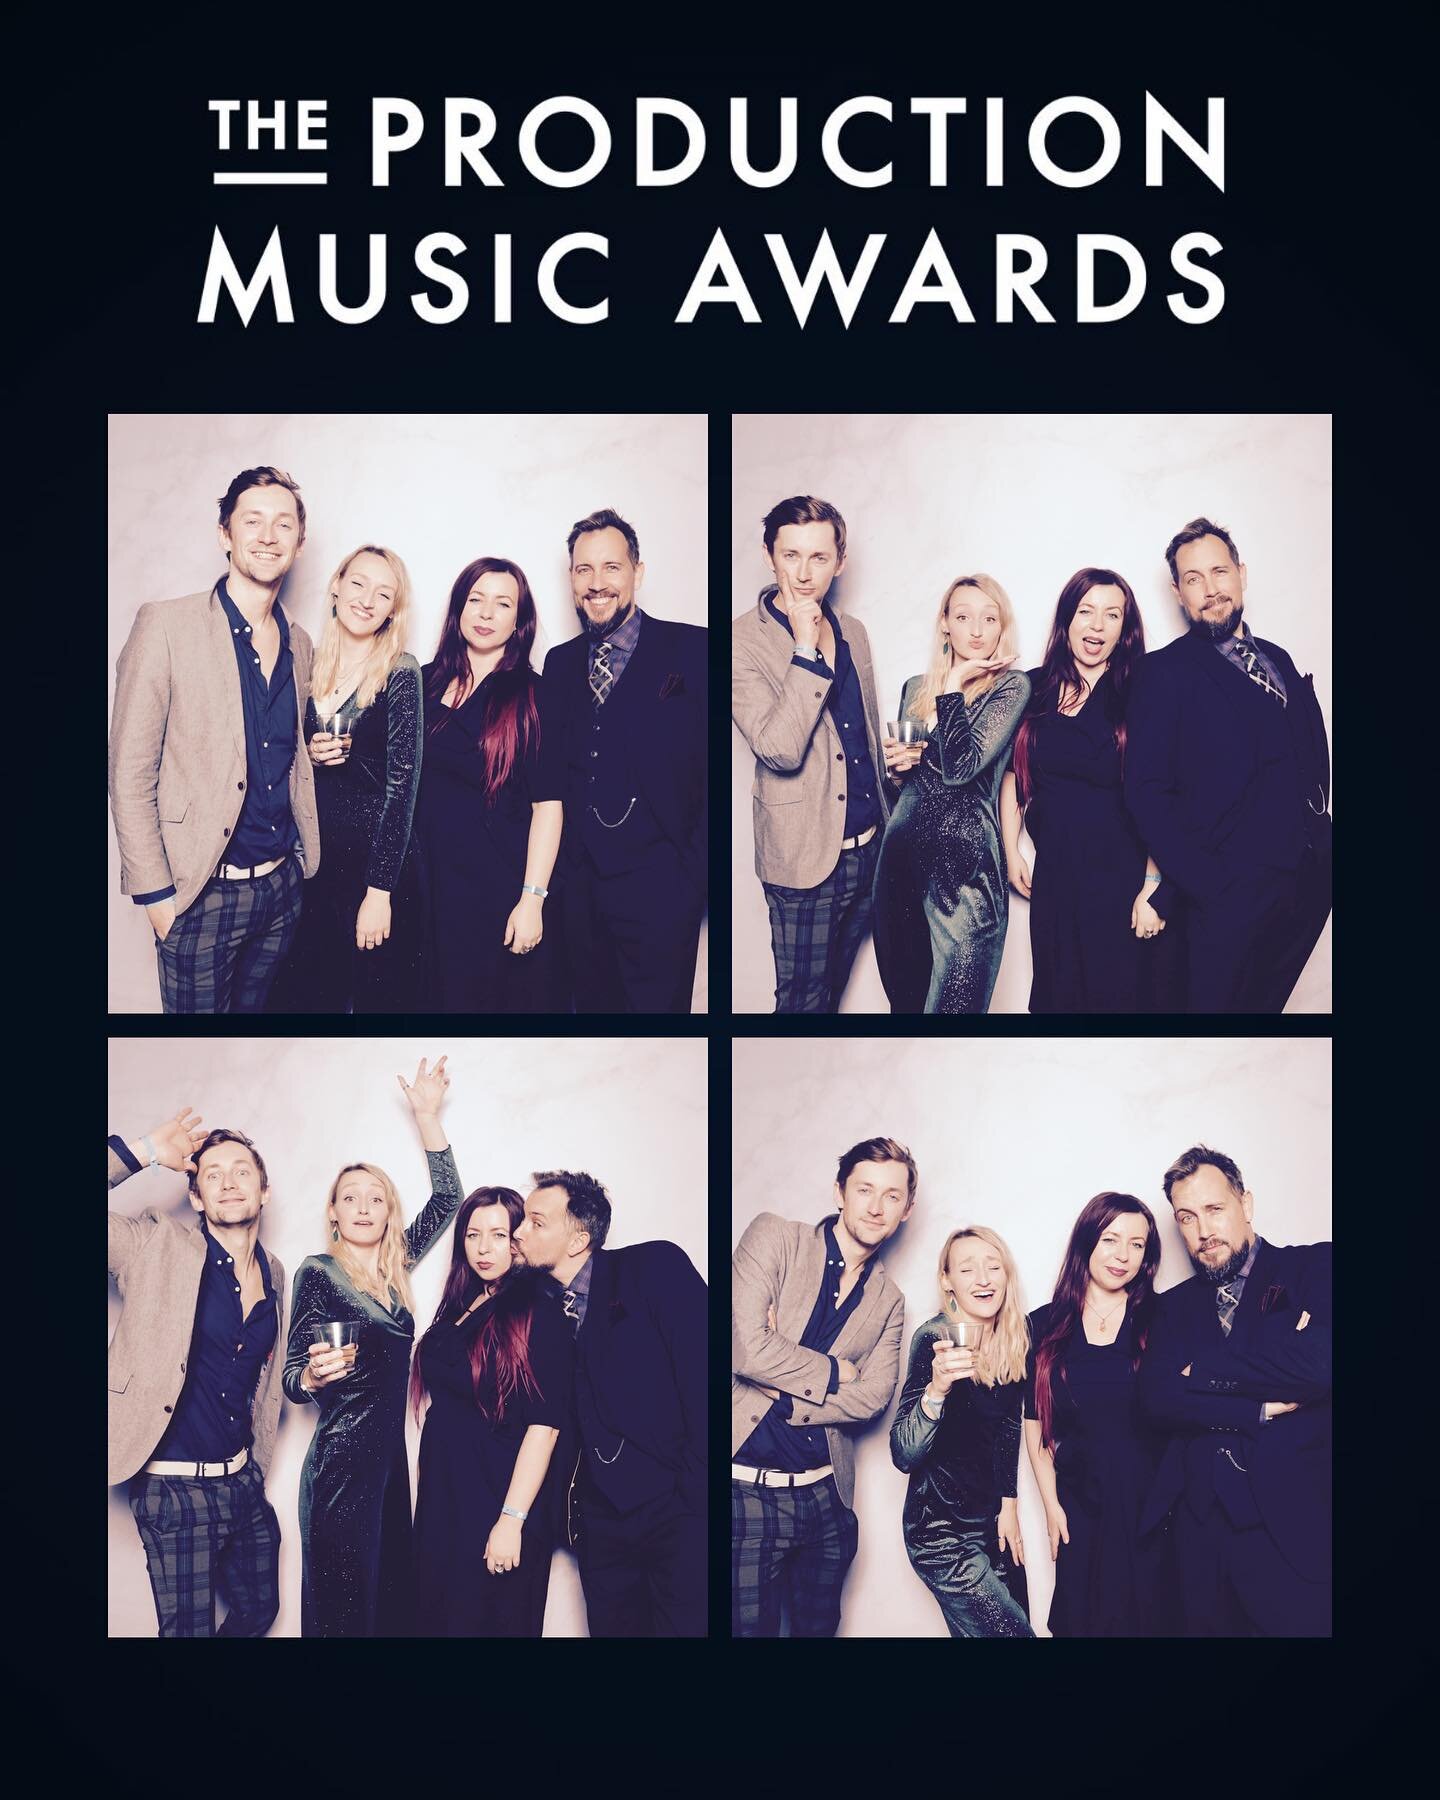 Thank you @richard_canavan @productionmusicawards for a wonderful night 🎉🍾🪩
Congrats to you @freddieprestmusic on your brilliant nomination!
Appreciate these wonderful brilliant people 🥰 would not be doing what I am without y&rsquo;all 💙💜